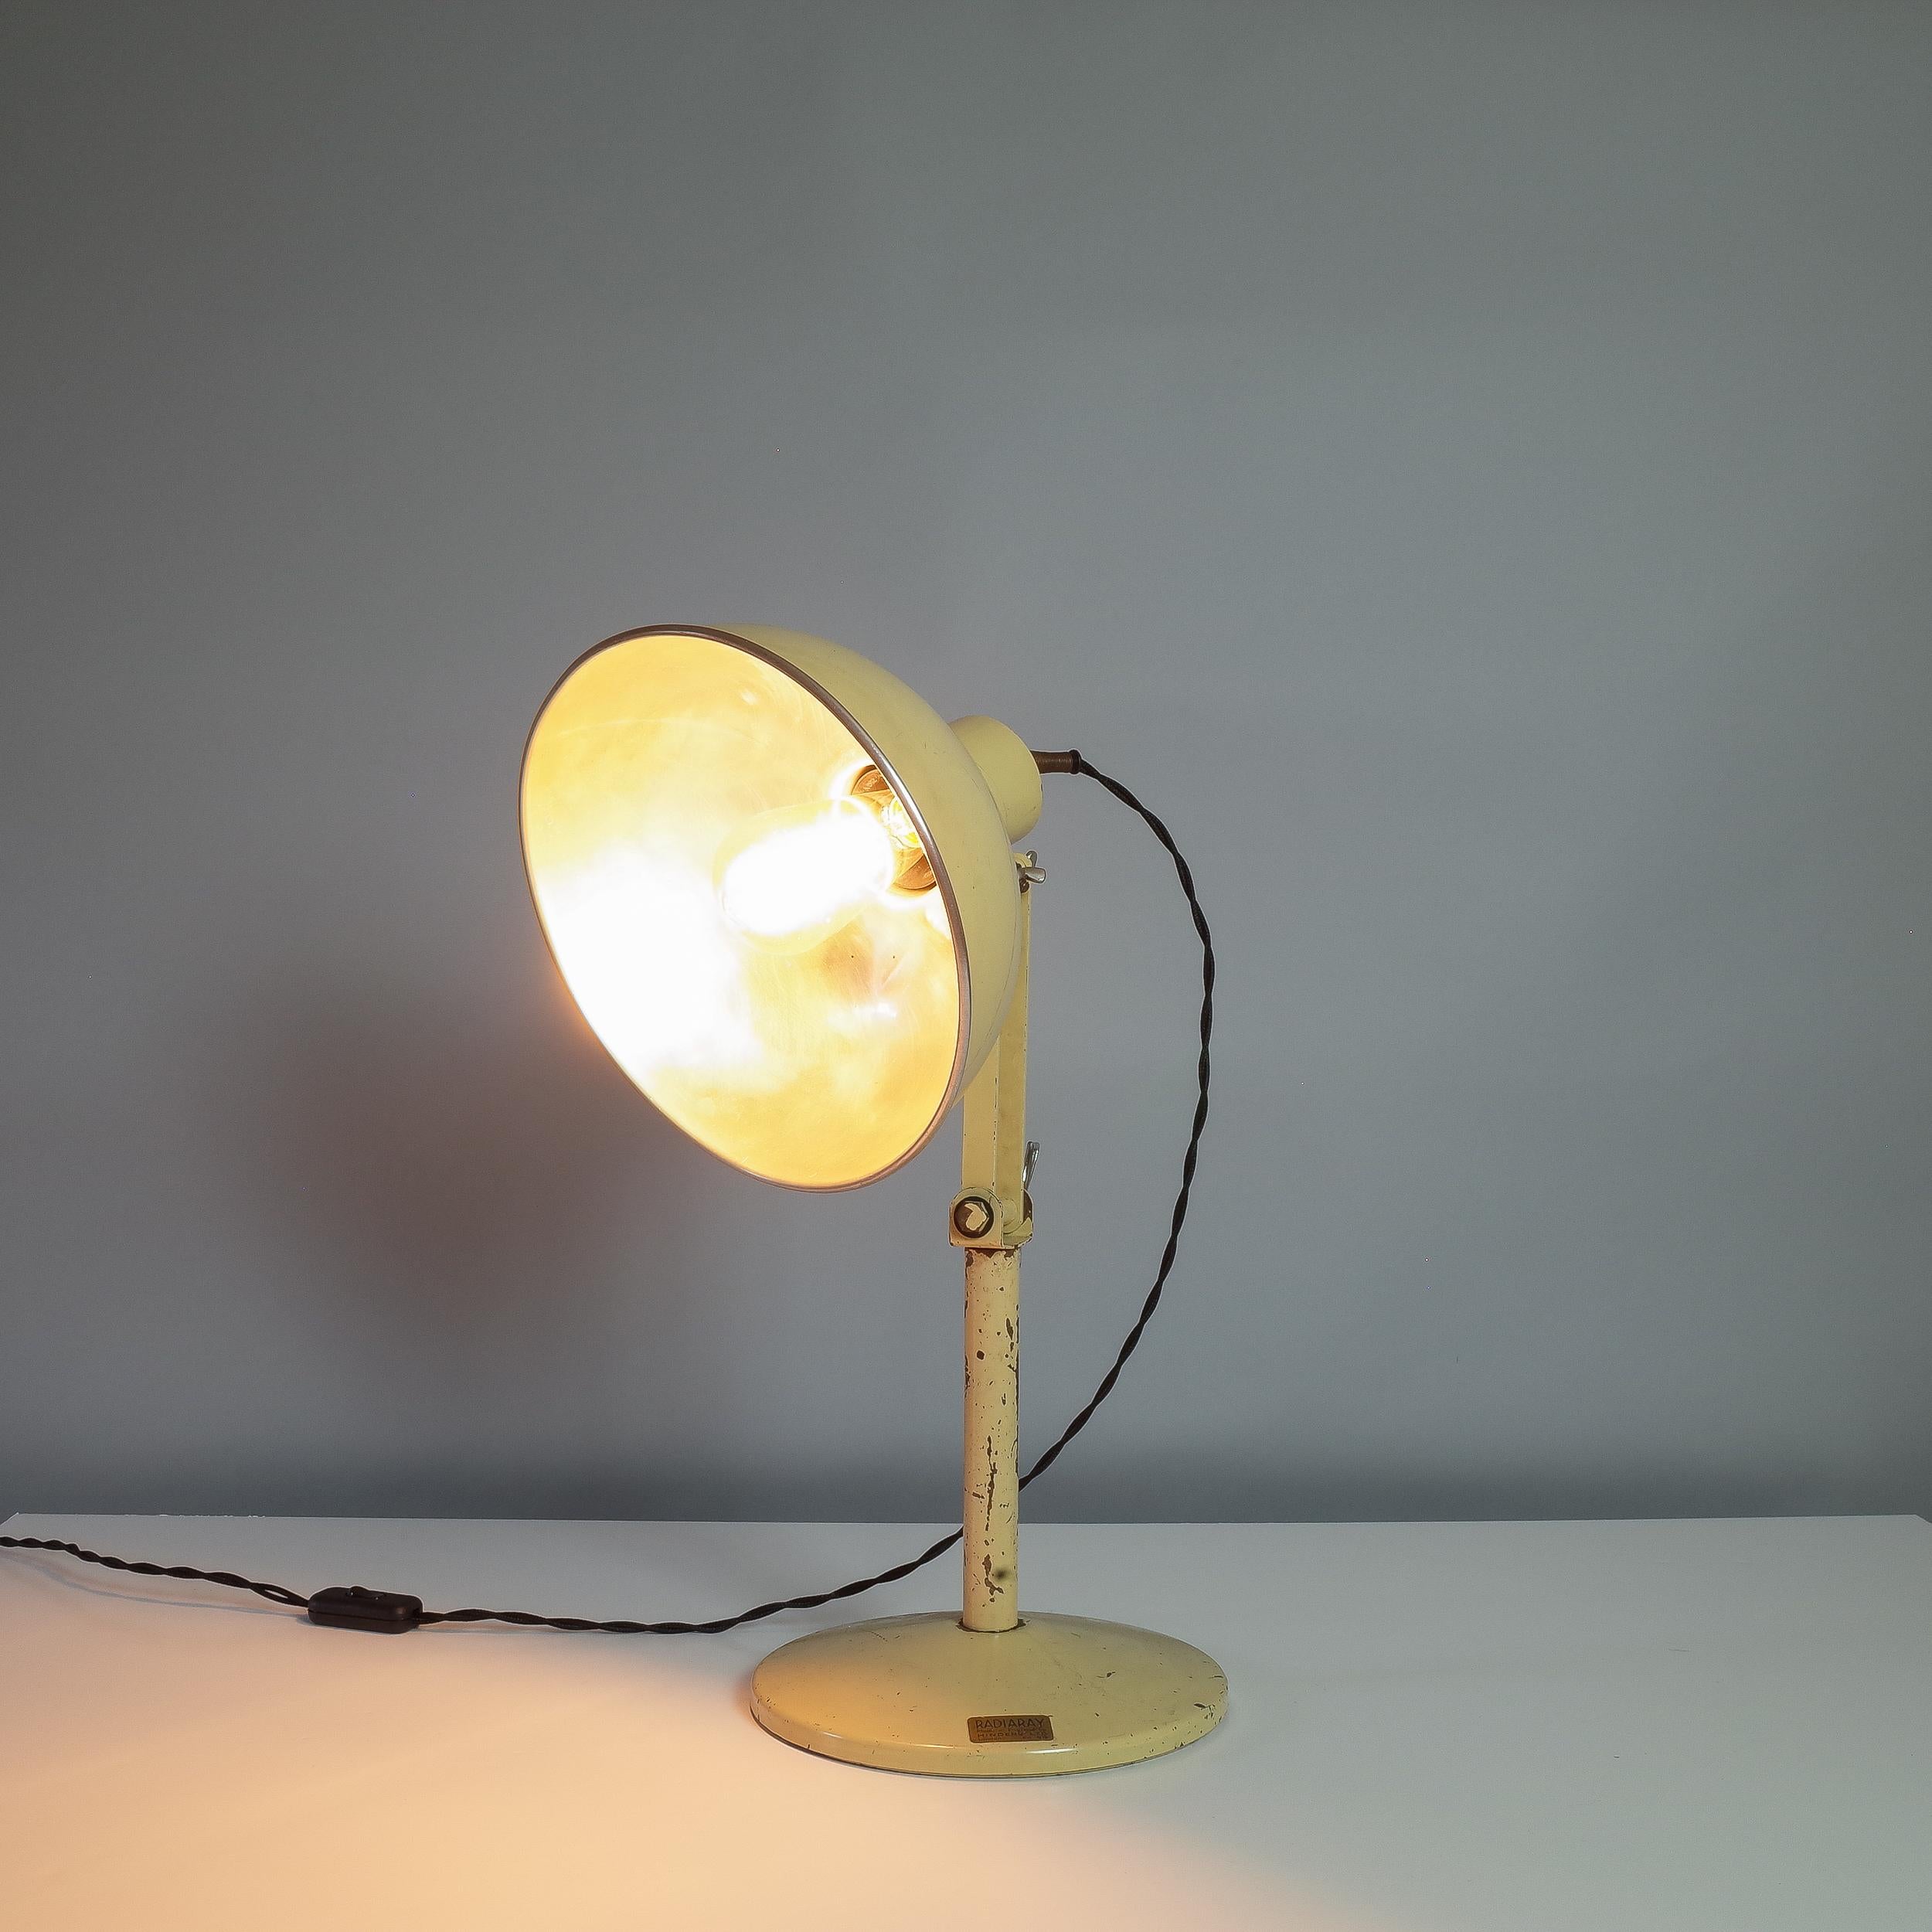 Aluminum Radiaray Industrial Desk Lamp from Hinders Ltd, London 1930s For Sale